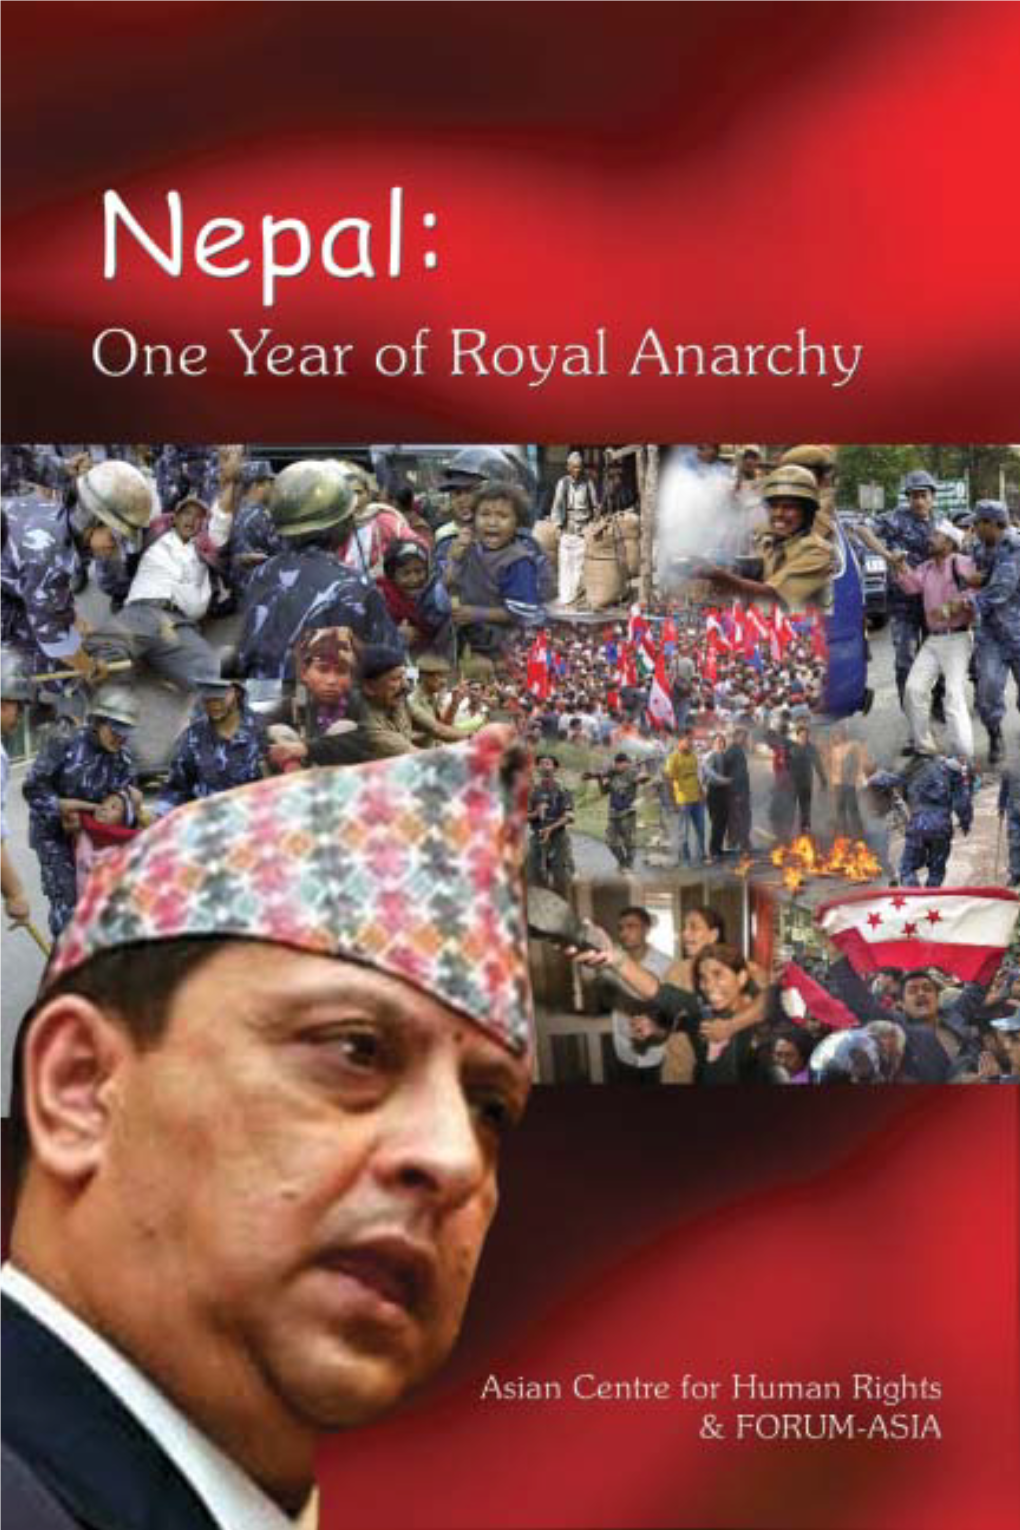 One Year of Royal Anarchy Nepal: One Year of Royal Anarchy